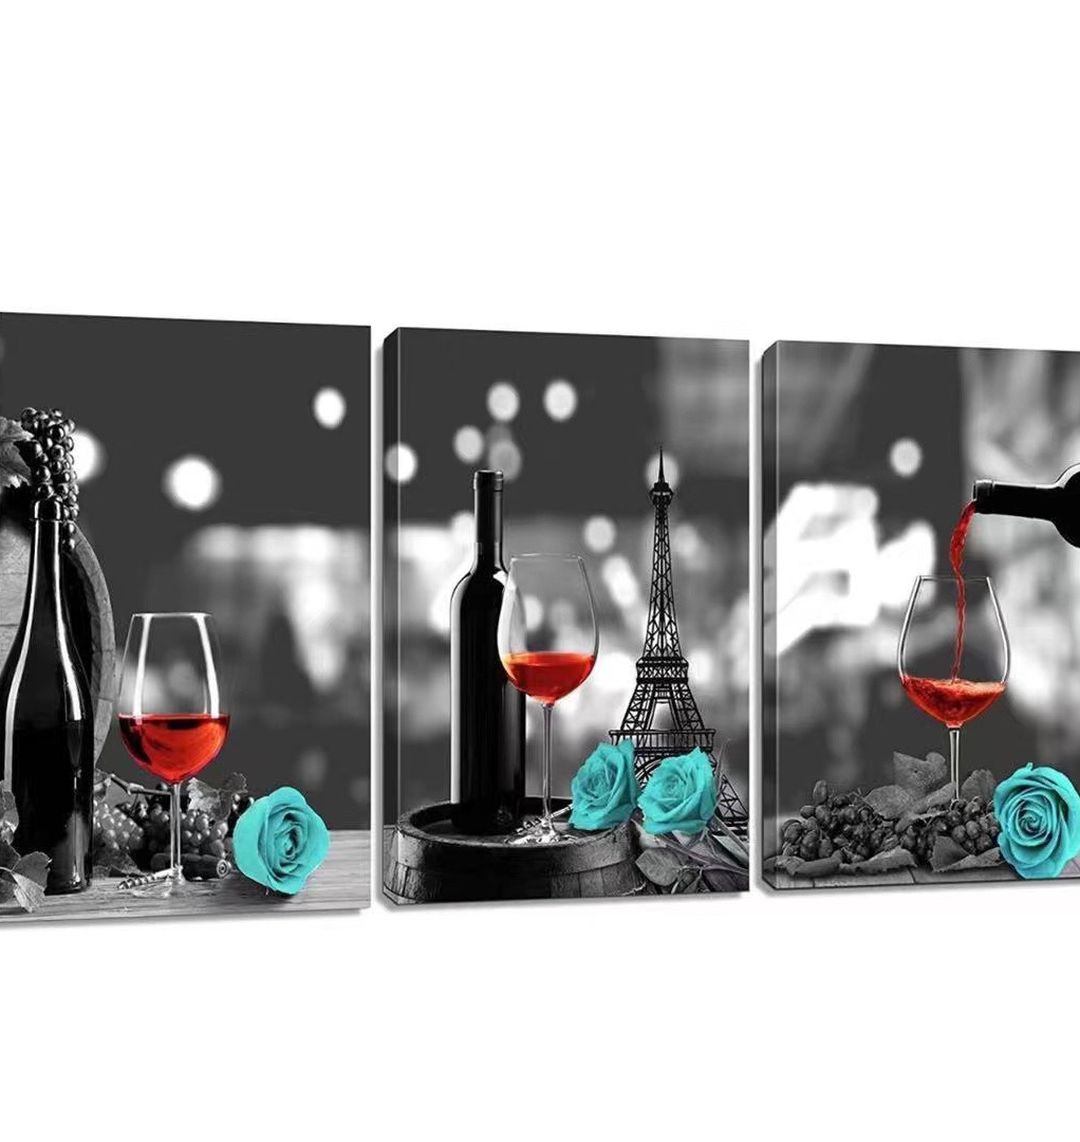 Kitchen Wall Decor Canvas Wall Art Red Wine Teal Rose Artwork for Home Walls Black and White Painting Giclee Printed Dining Room Decor Turquoise Pine 